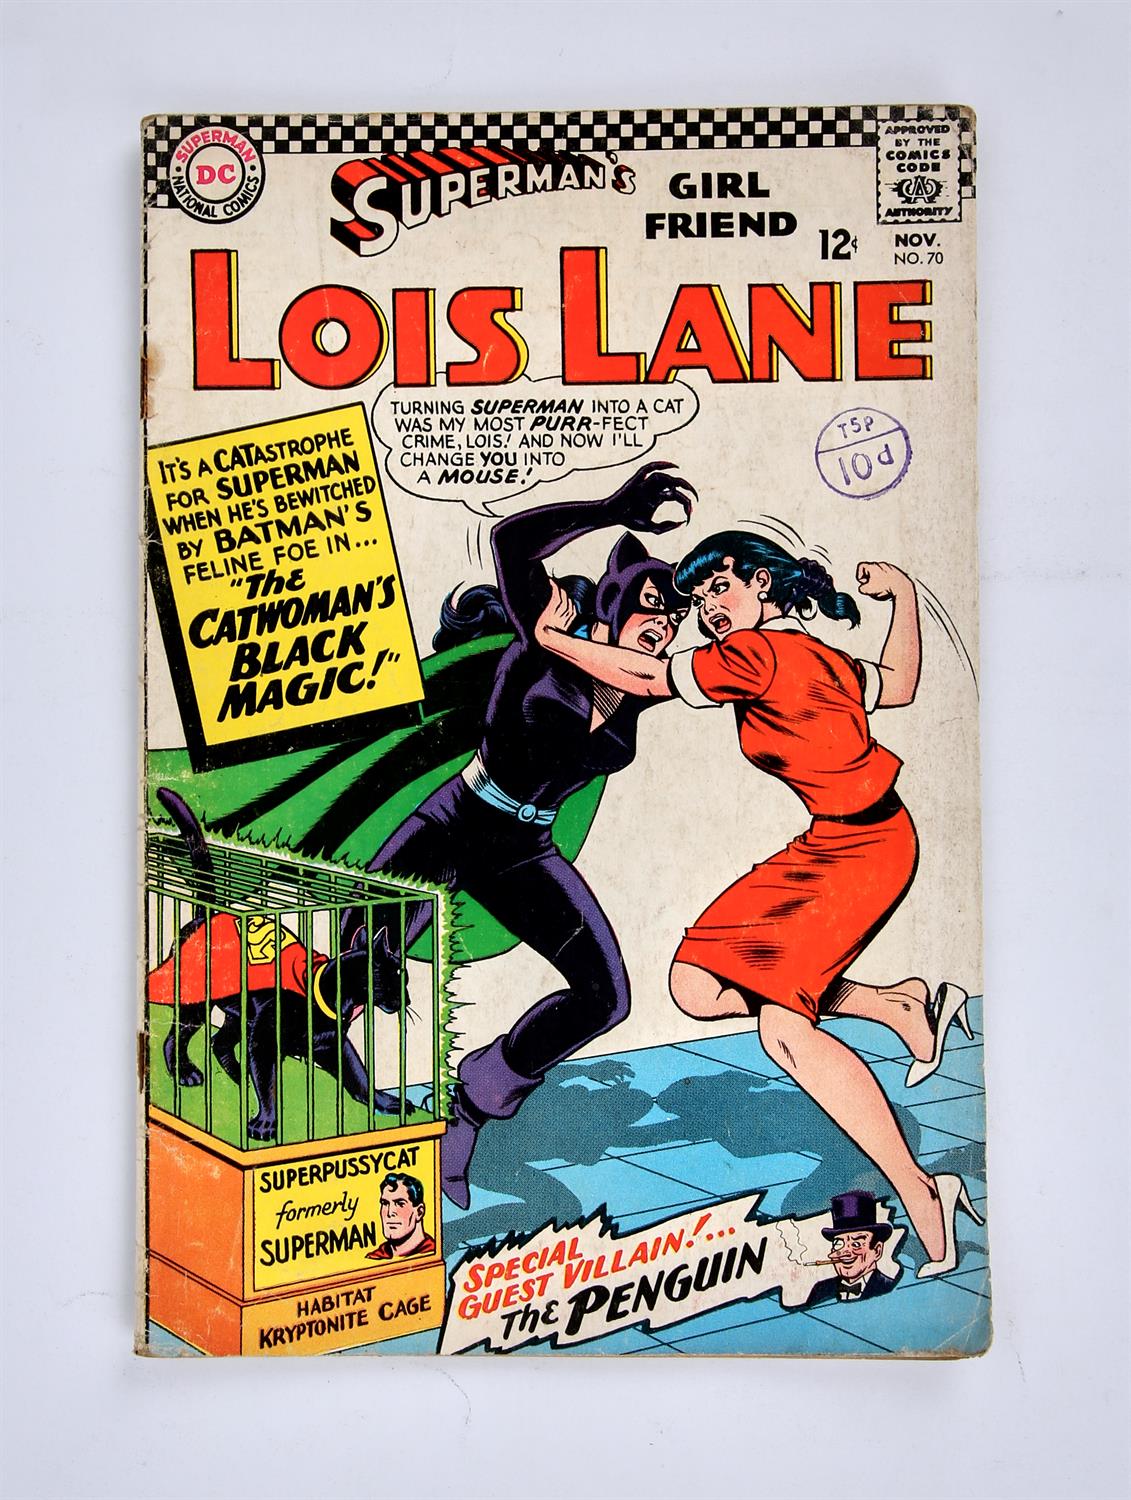 Superman’s Girl Friend Lois Lane No. 70 featuring the 1st appearance of Silver-age Catwoman (DC